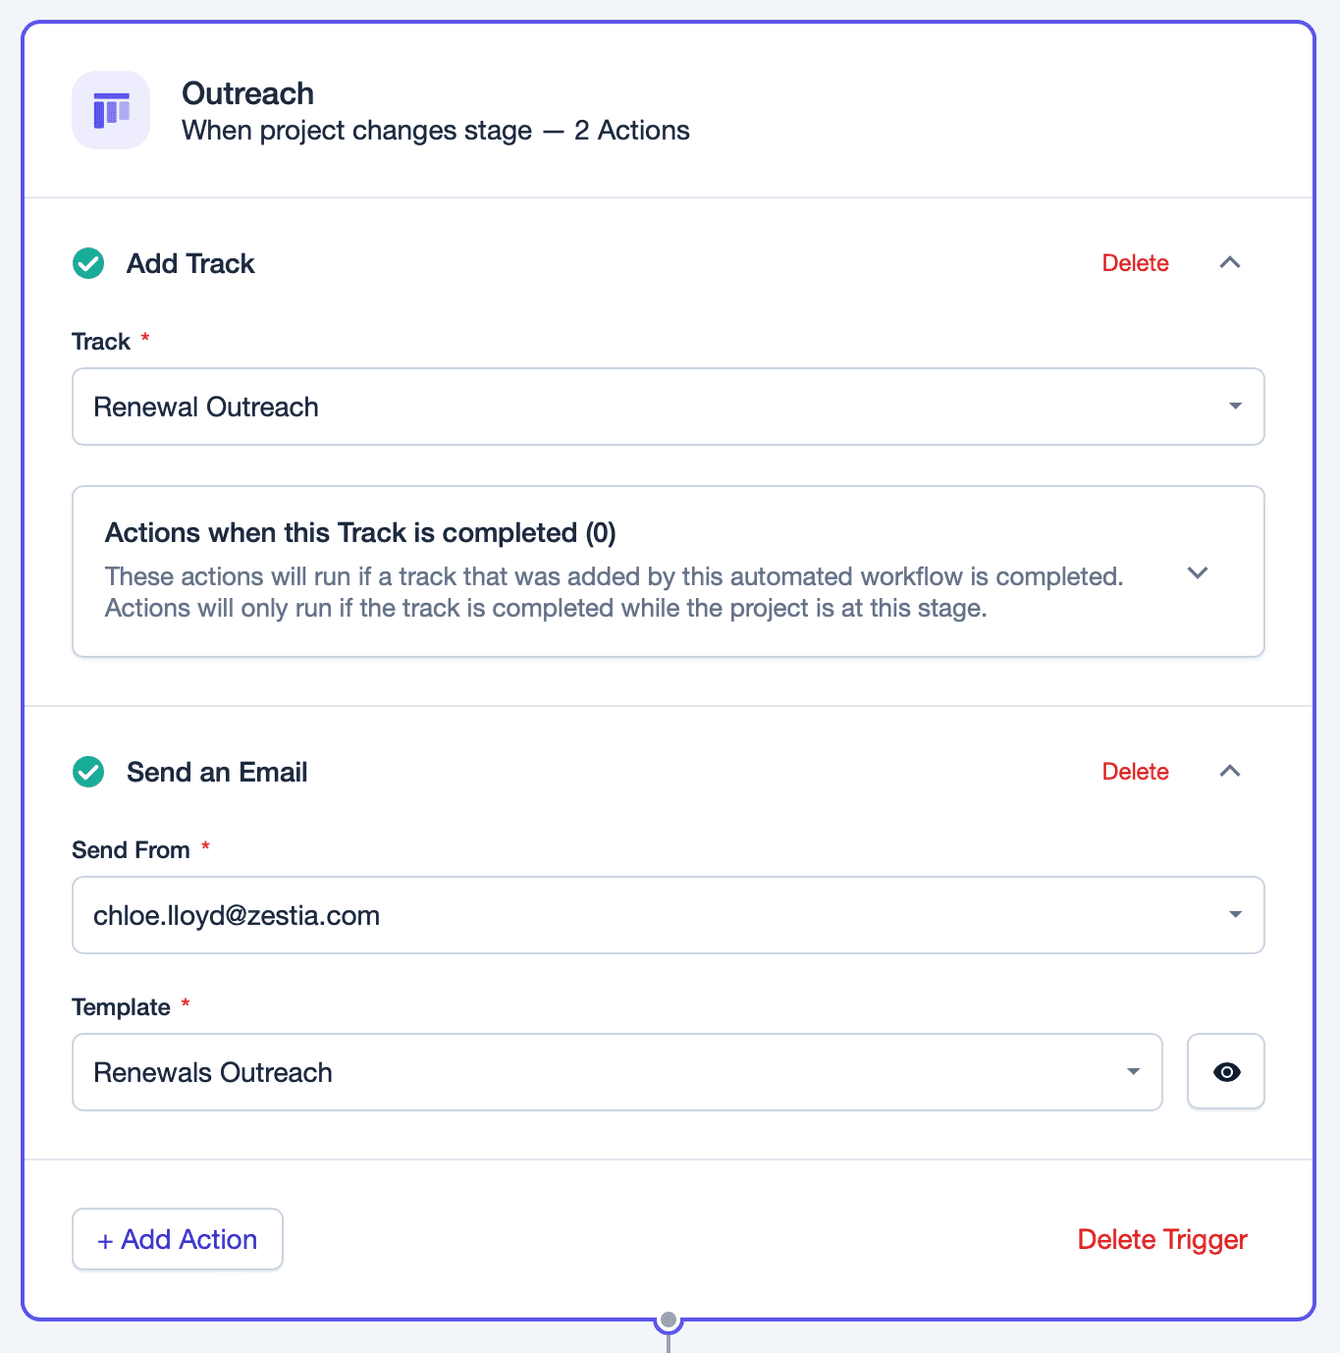 Workflow Automation adding a track and sending an email